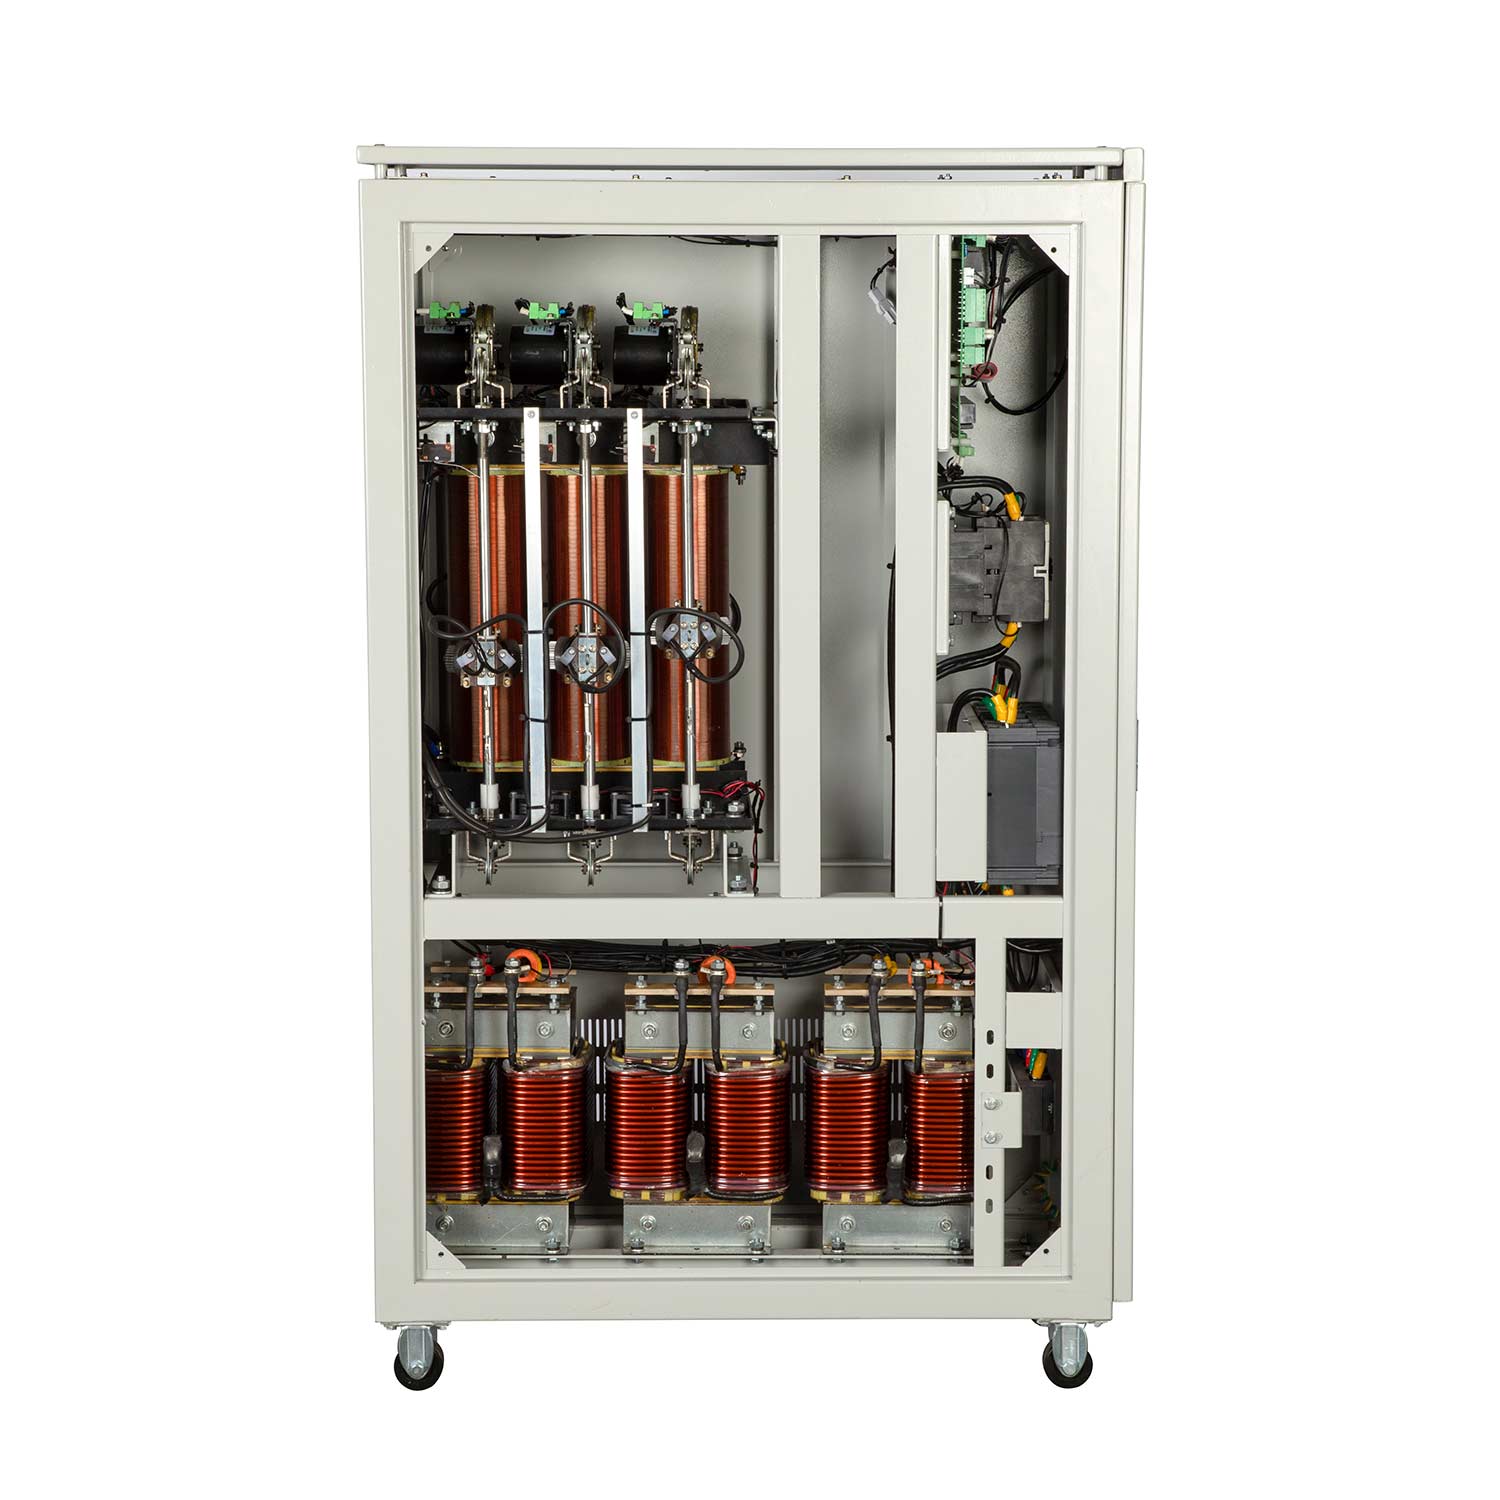 3000 kVA 3 Phase Automatic Voltage Stabilizer